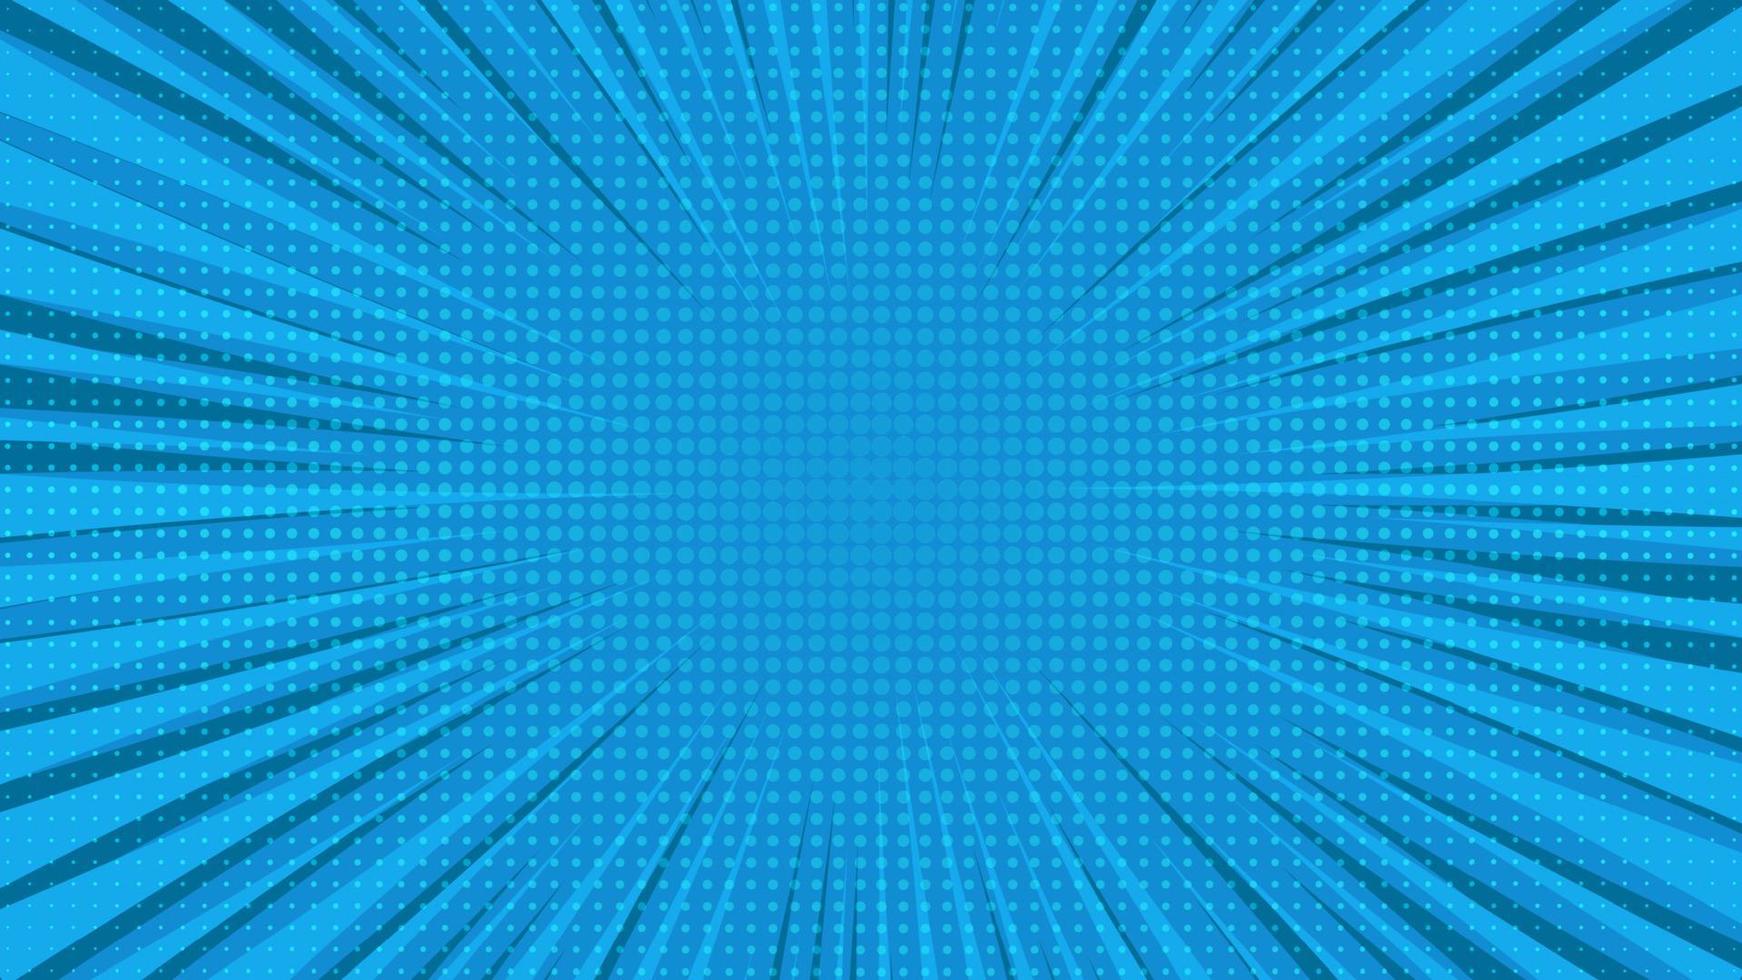 Blue comic book page background in pop art style with empty space. Template with rays, dots and halftone effect texture. Vector illustration